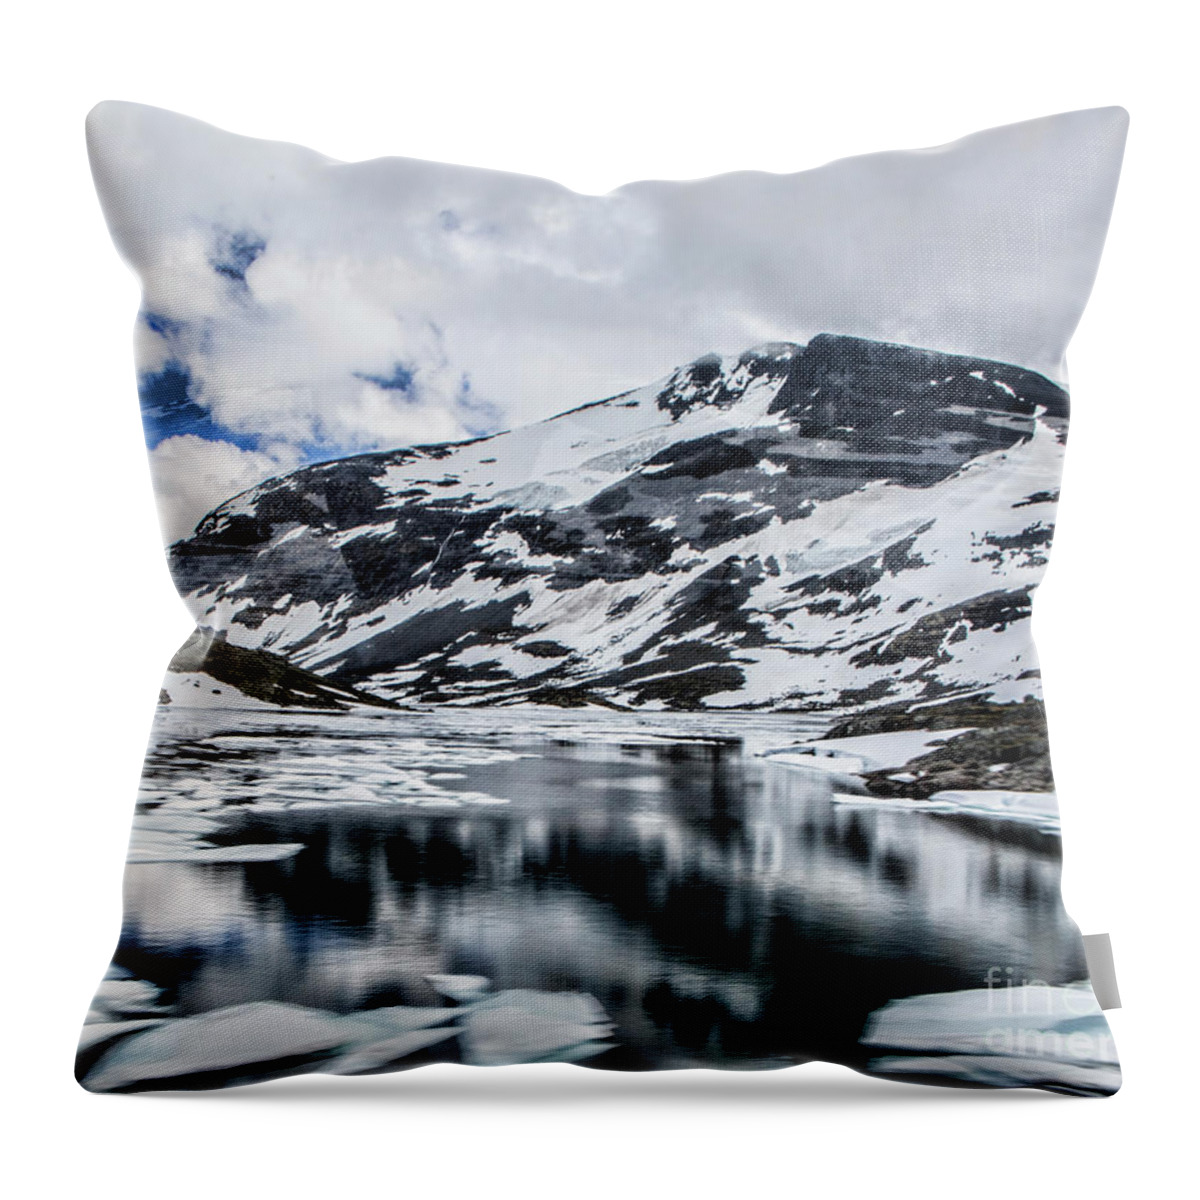 Skjolden Throw Pillow featuring the photograph Skjolden Glacial Beauty by Shirley Mangini